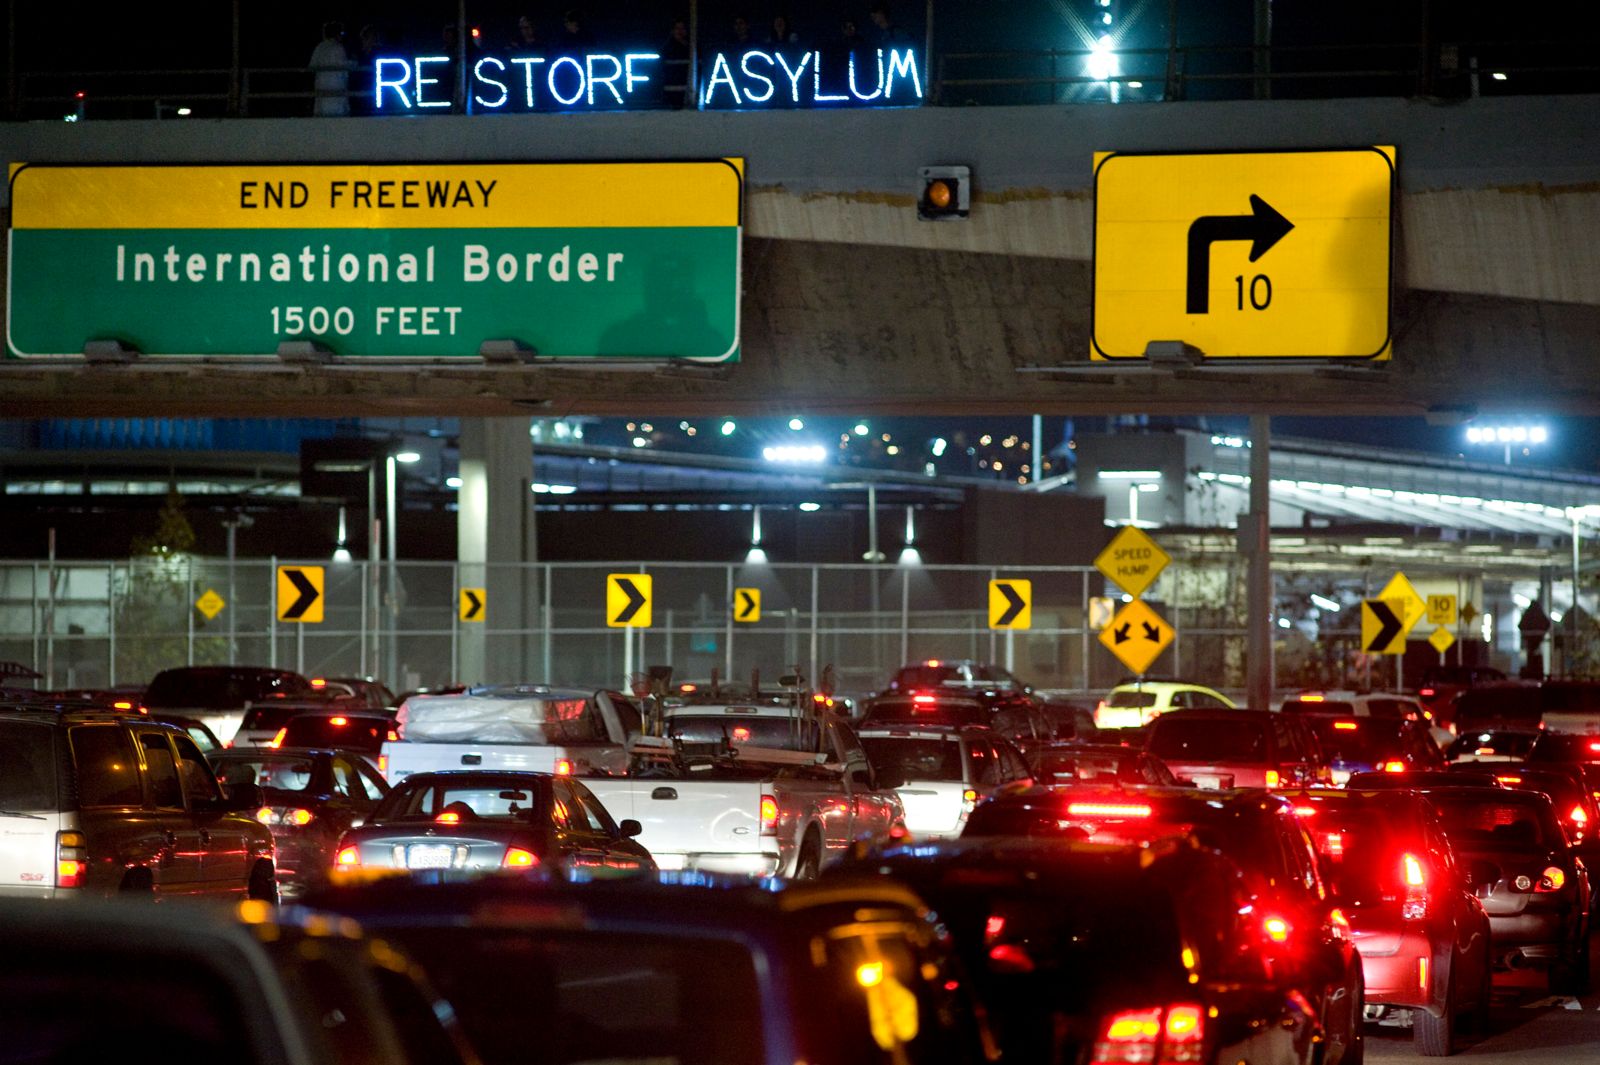 No Transit: The criminal treatment of transgender asylum seekers in the United States